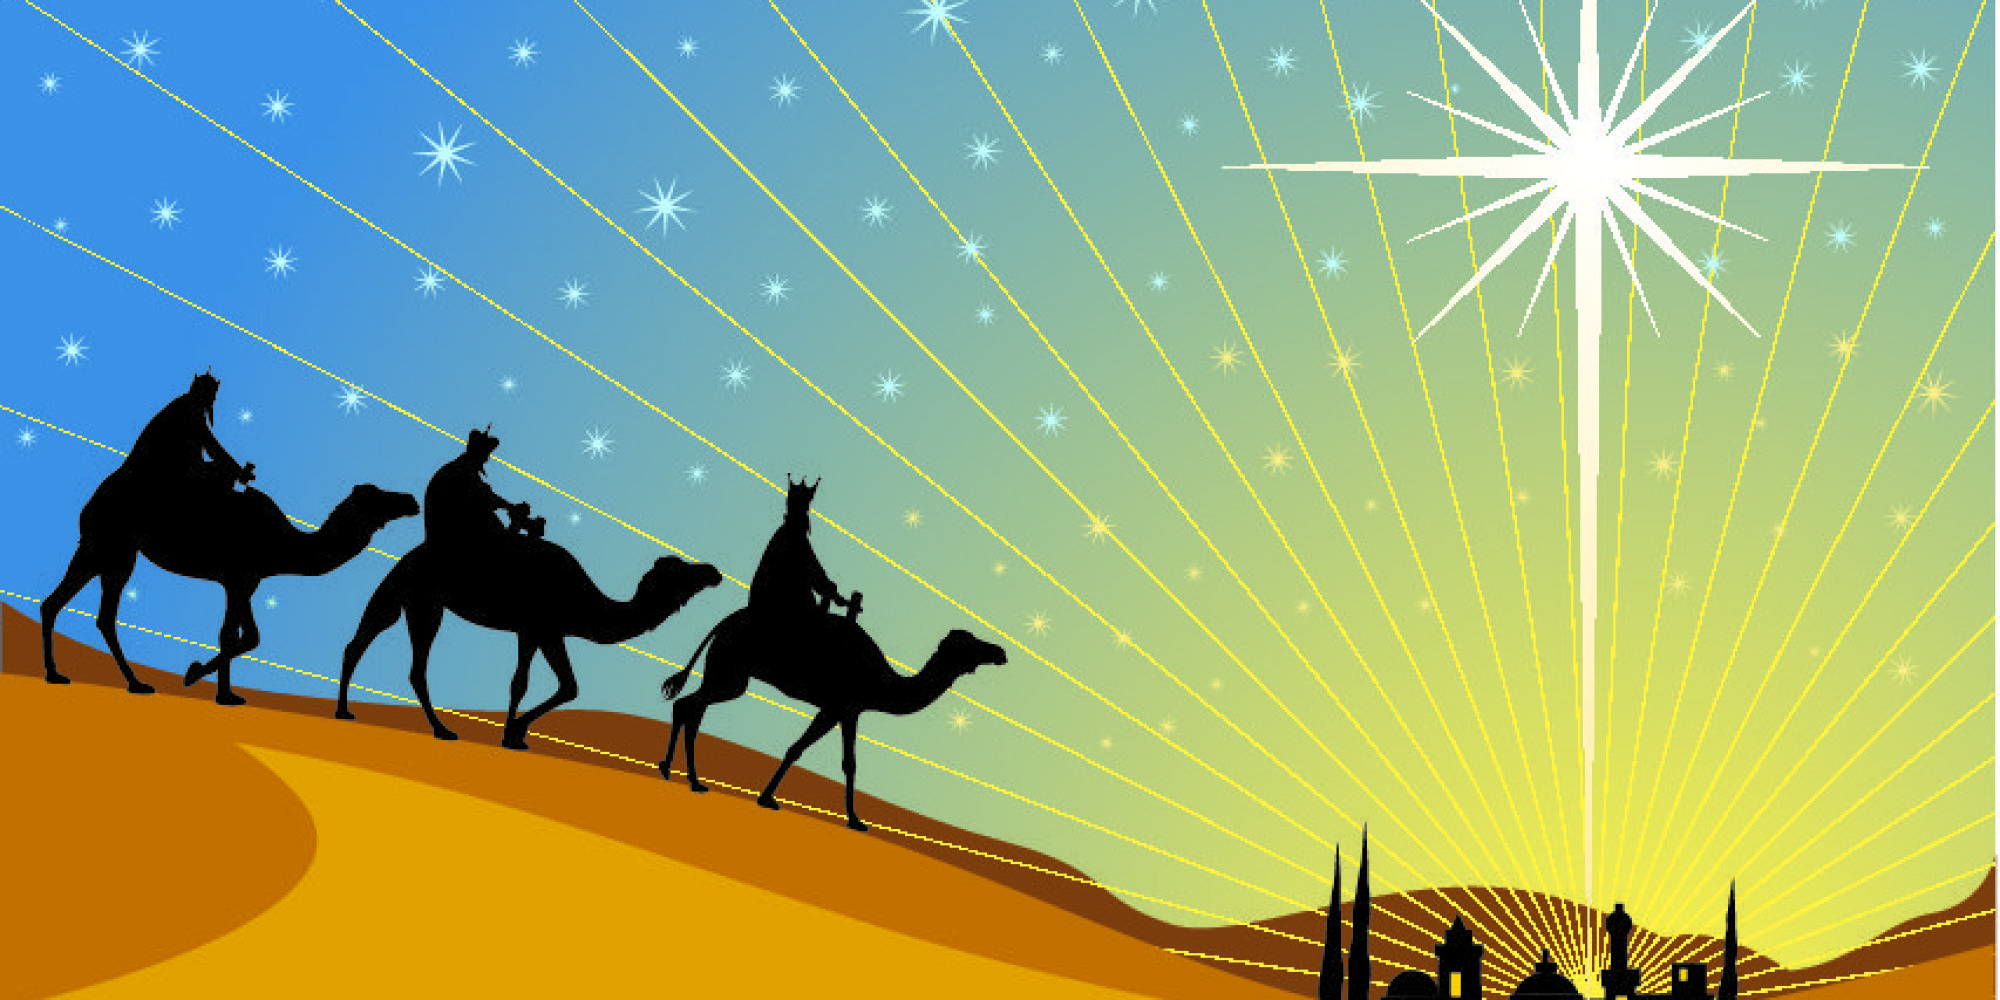 What do the 3 gifts of the Magi symbolize?